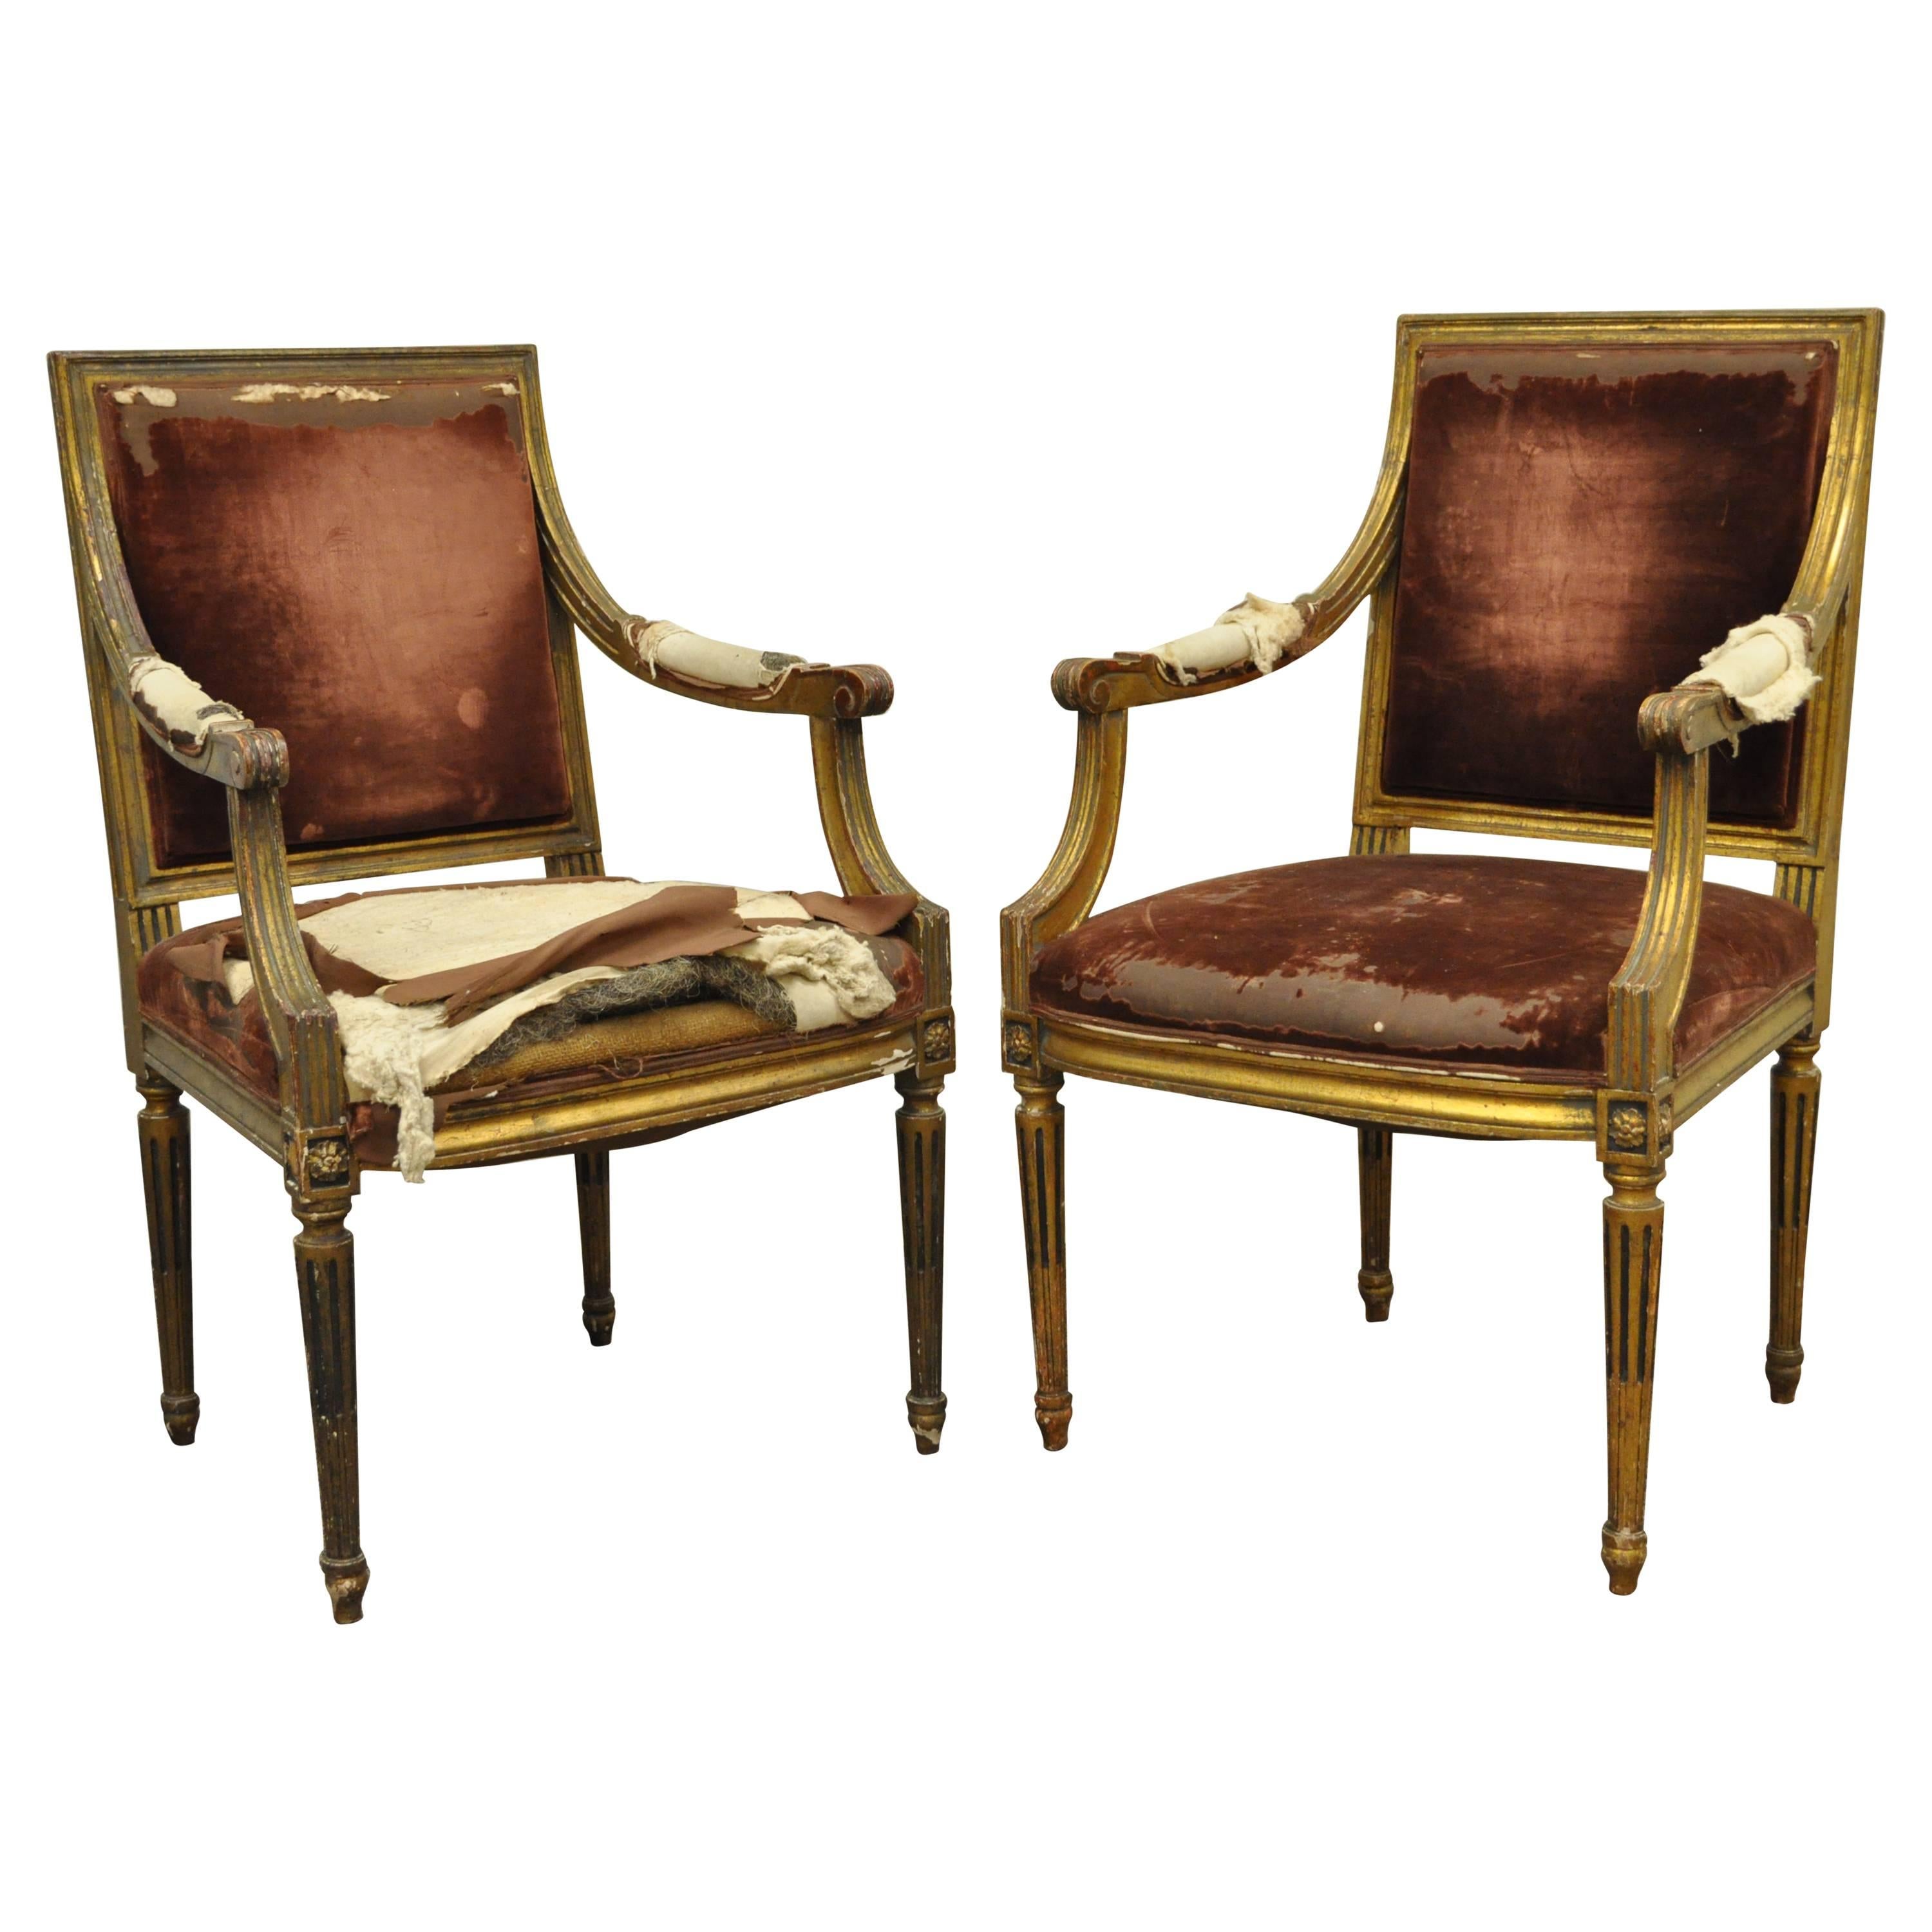 Pair of Gold Giltwood 19th Century French Louis XVI Style Dining Armchairs